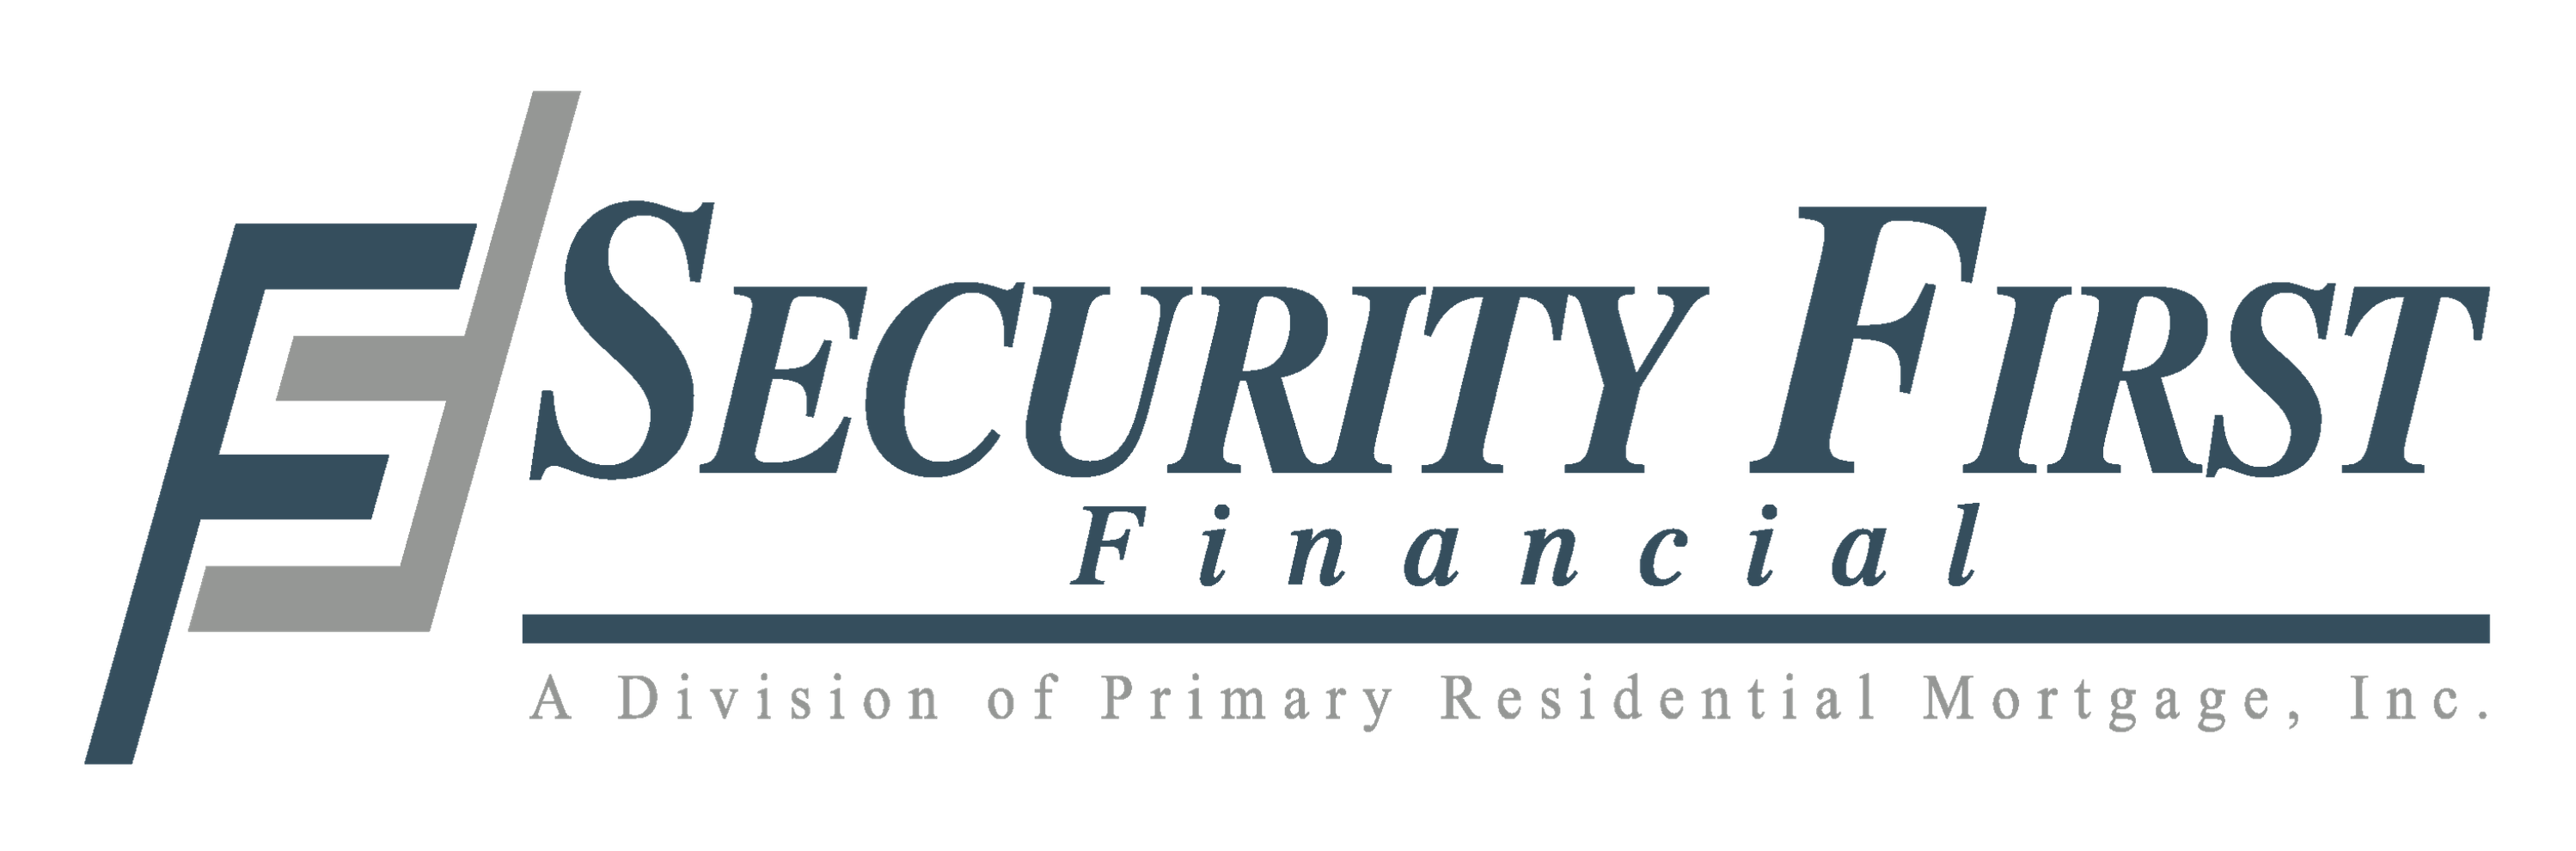 Security First Financial, A Division of Primary Residential Mortgage, Inc. Primary Logo